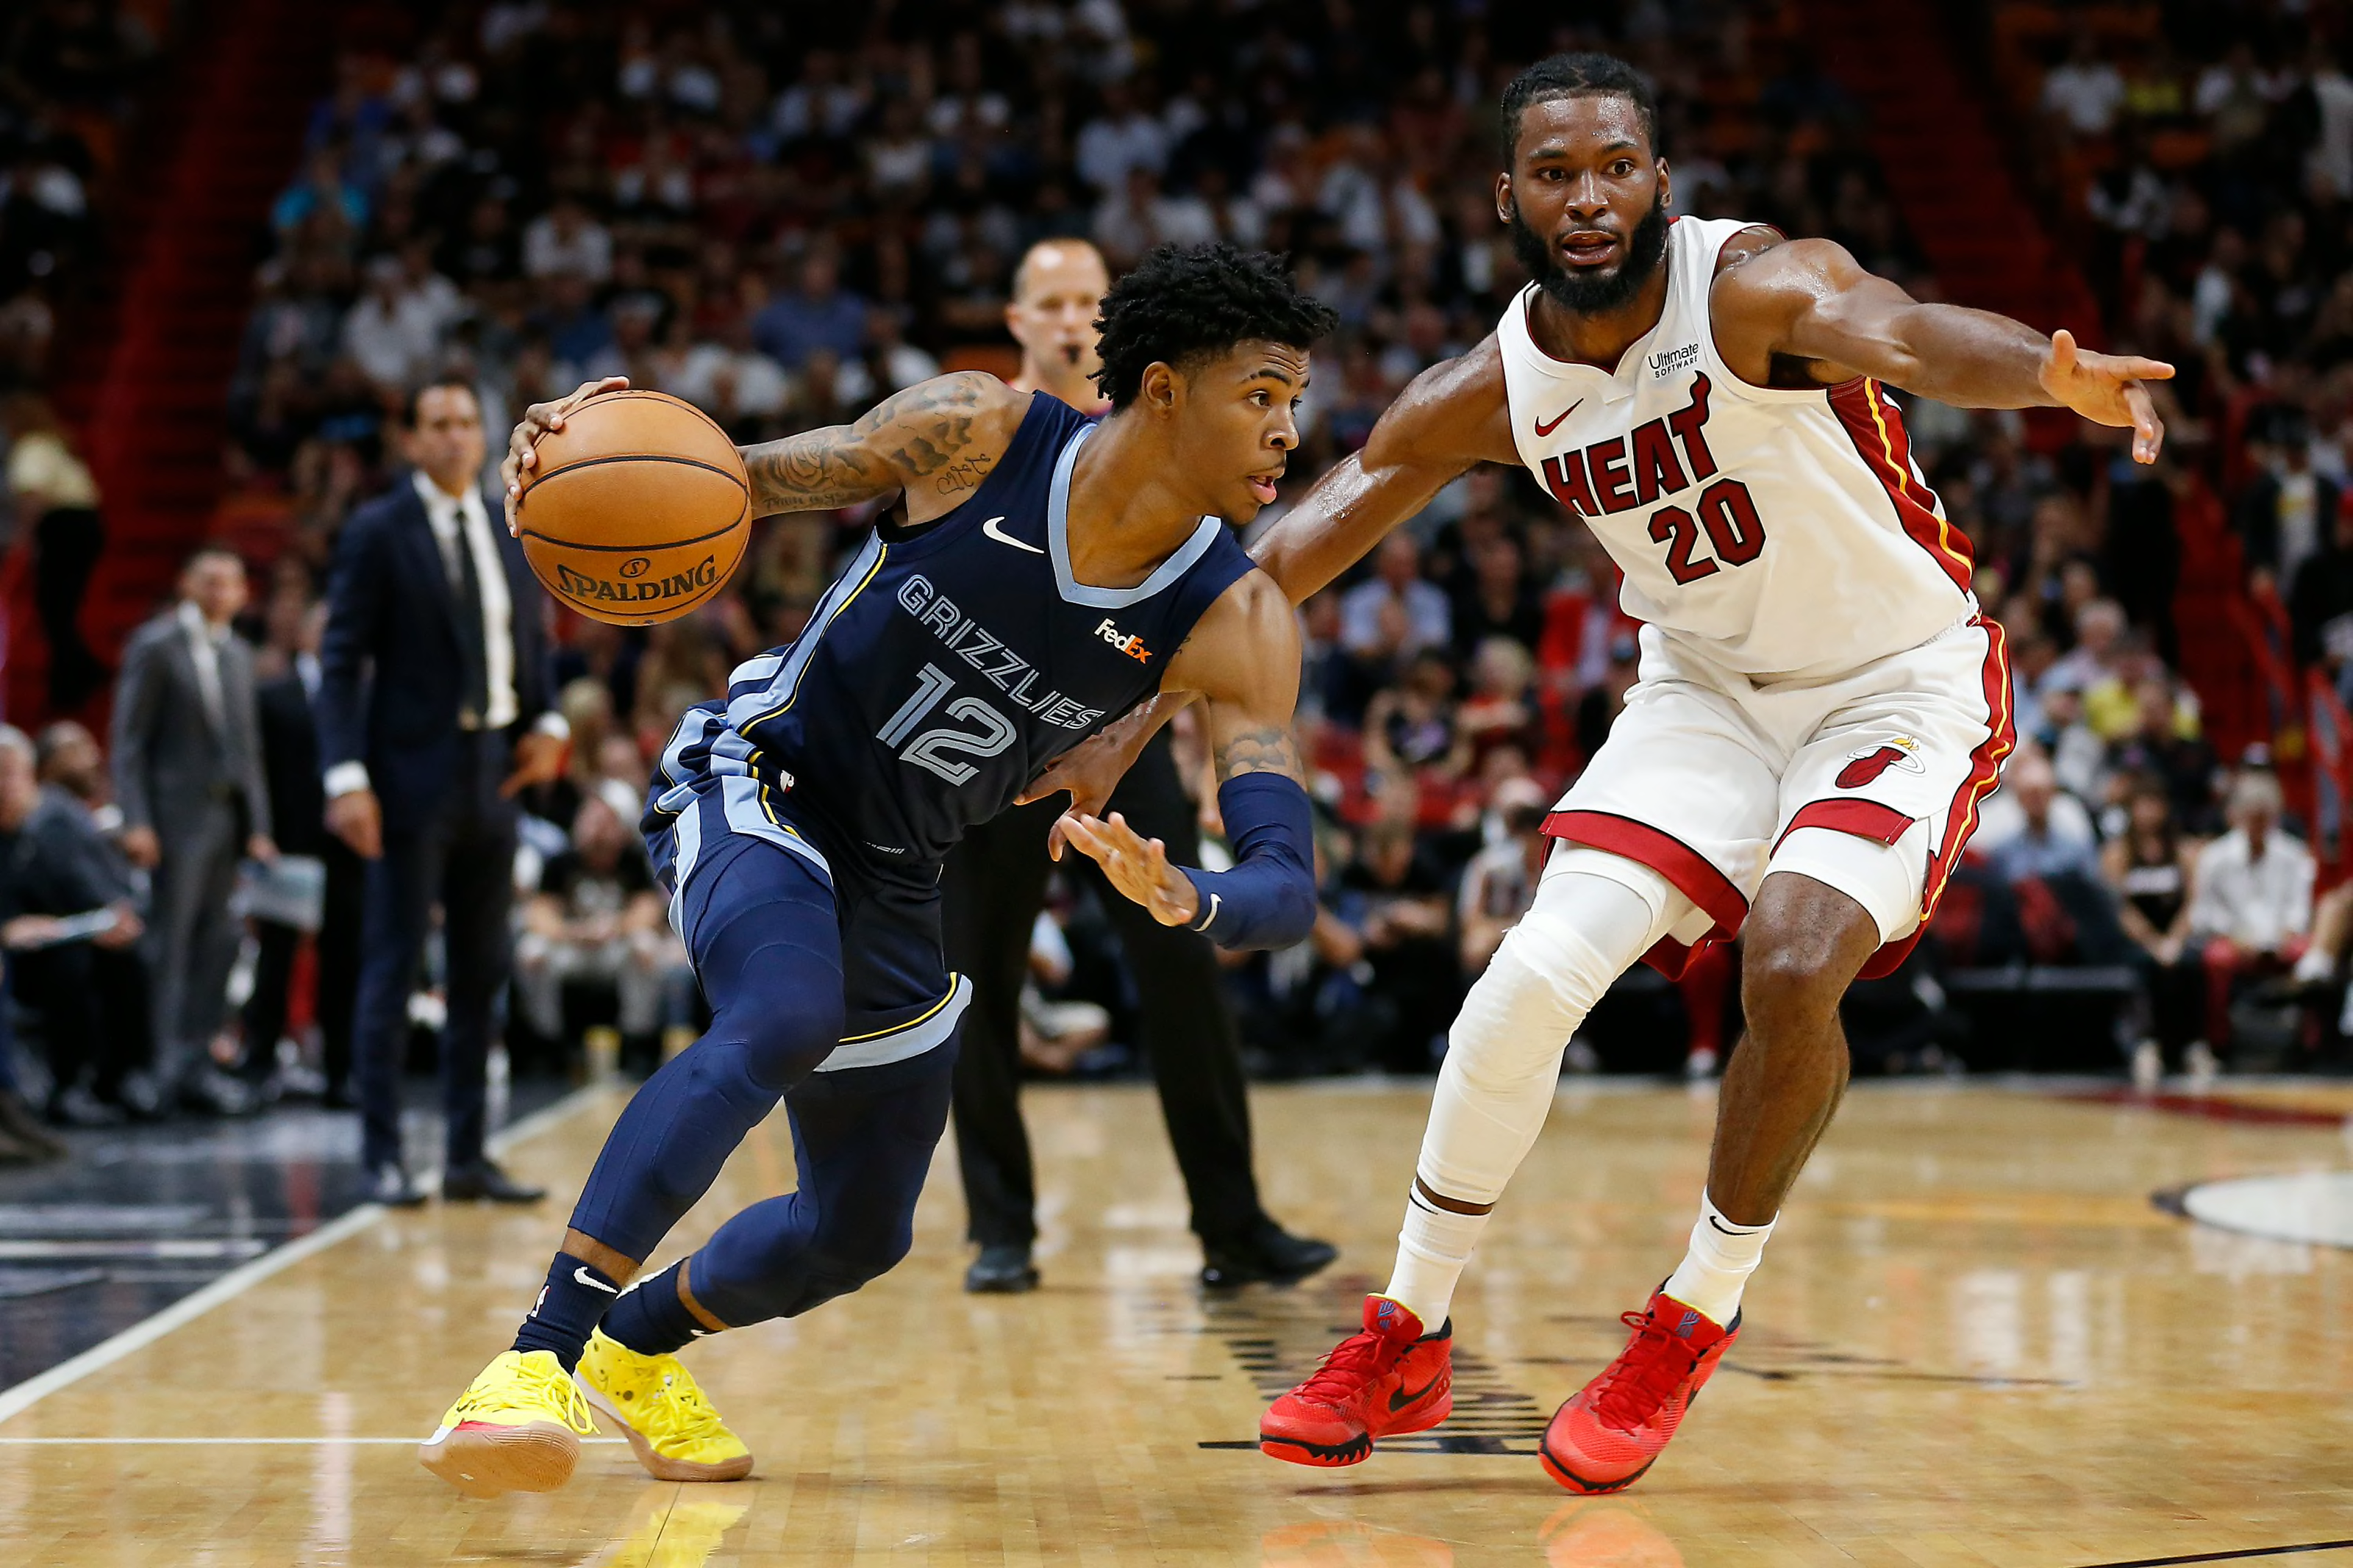 Miami Heat: Here's why you should still watch the NBA Play-In Games